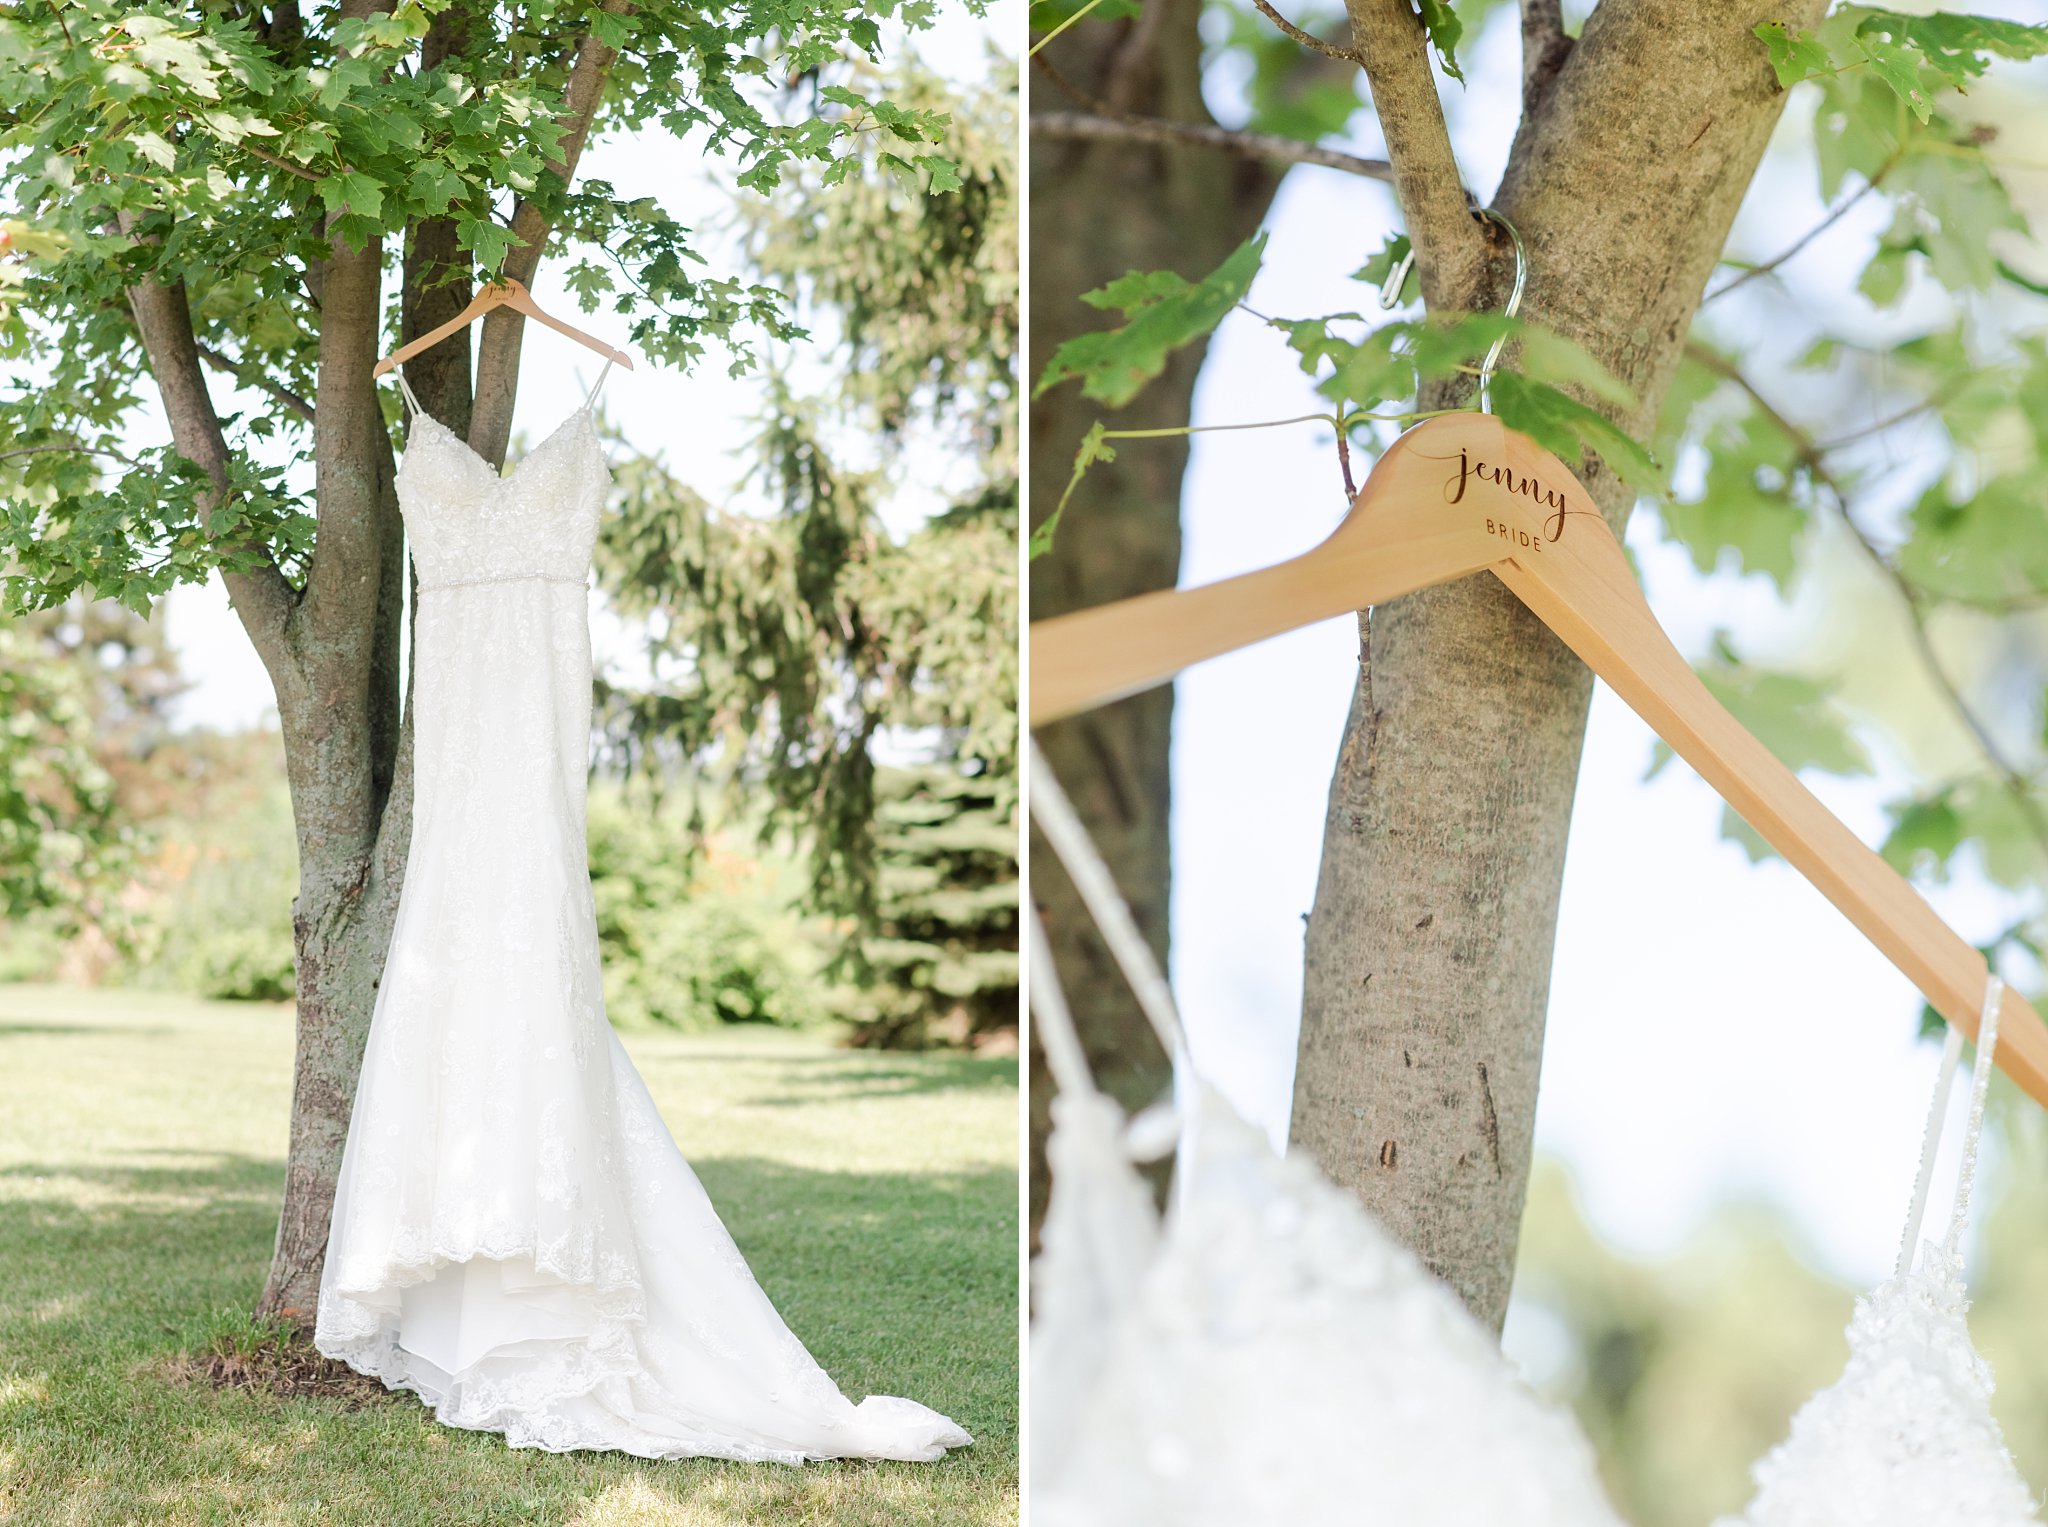 Two photos of a wedding dress hanging in a tree. Photo one is a wide photo of the full dress. Photo 2 is a close-up of the hanger in a tree, which has the name Jenny painted on it.